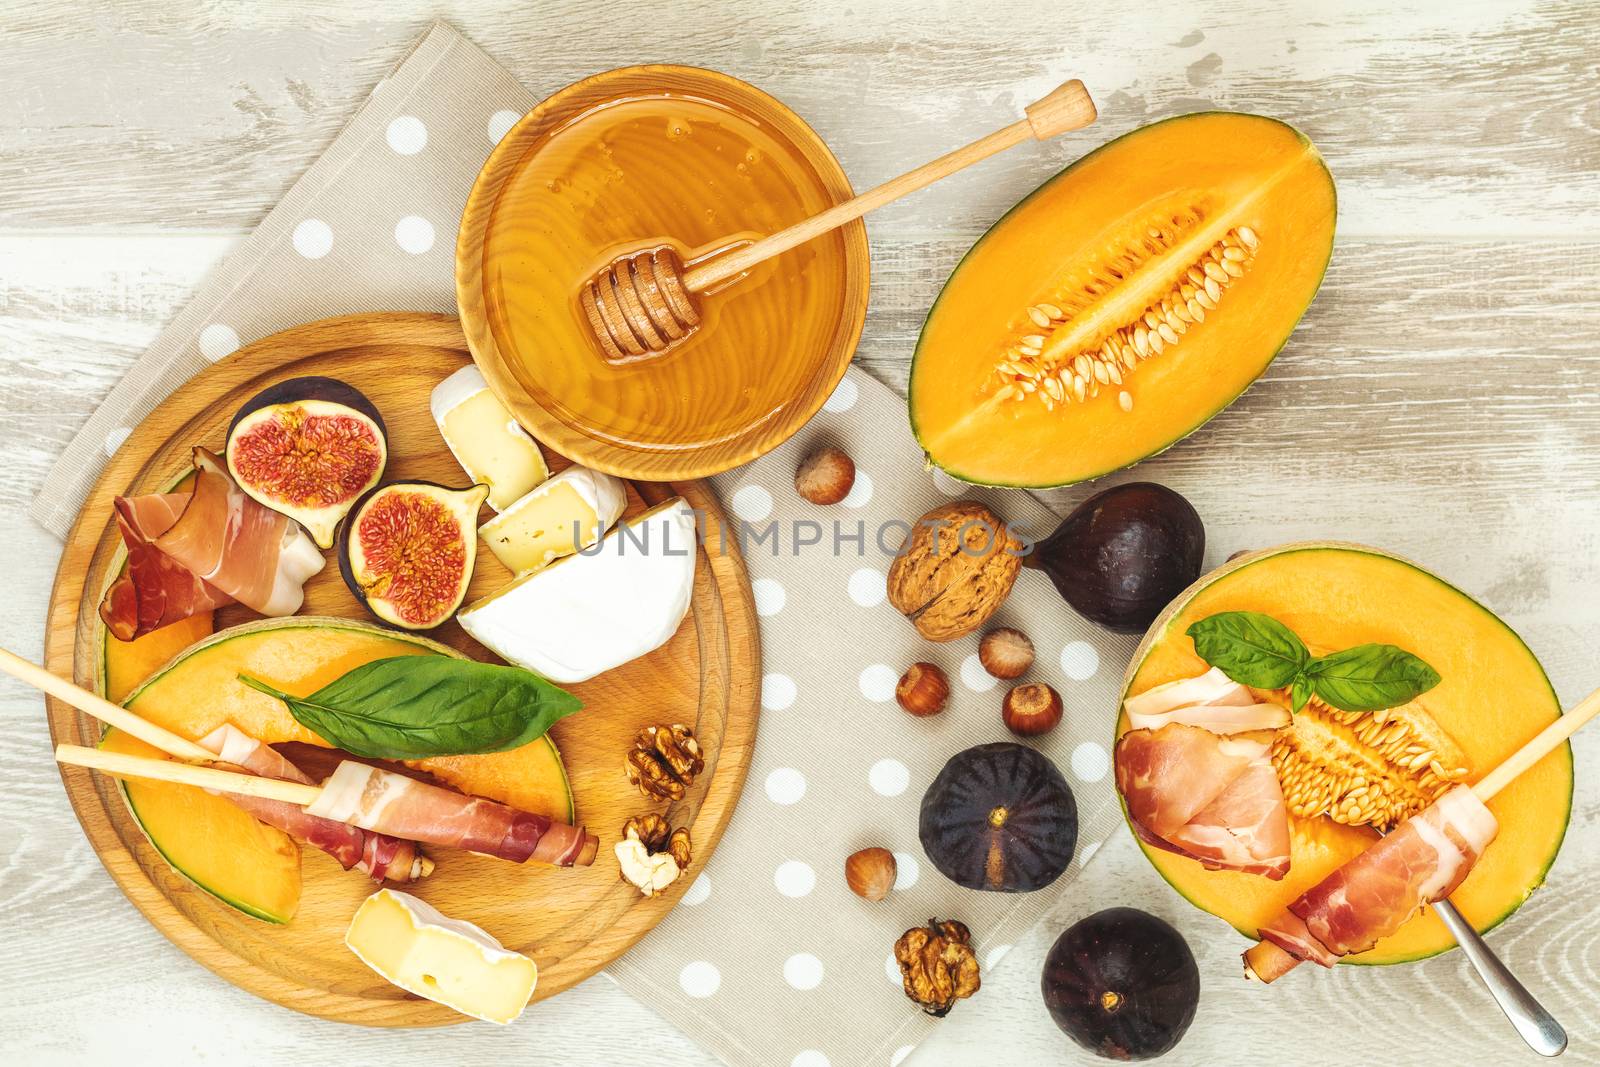 Cantaloupe melon sliced with Prosciutto jamon, basil leaves, fig, Camembert, honey and dried cherry. Italian appetizer on wooden background.